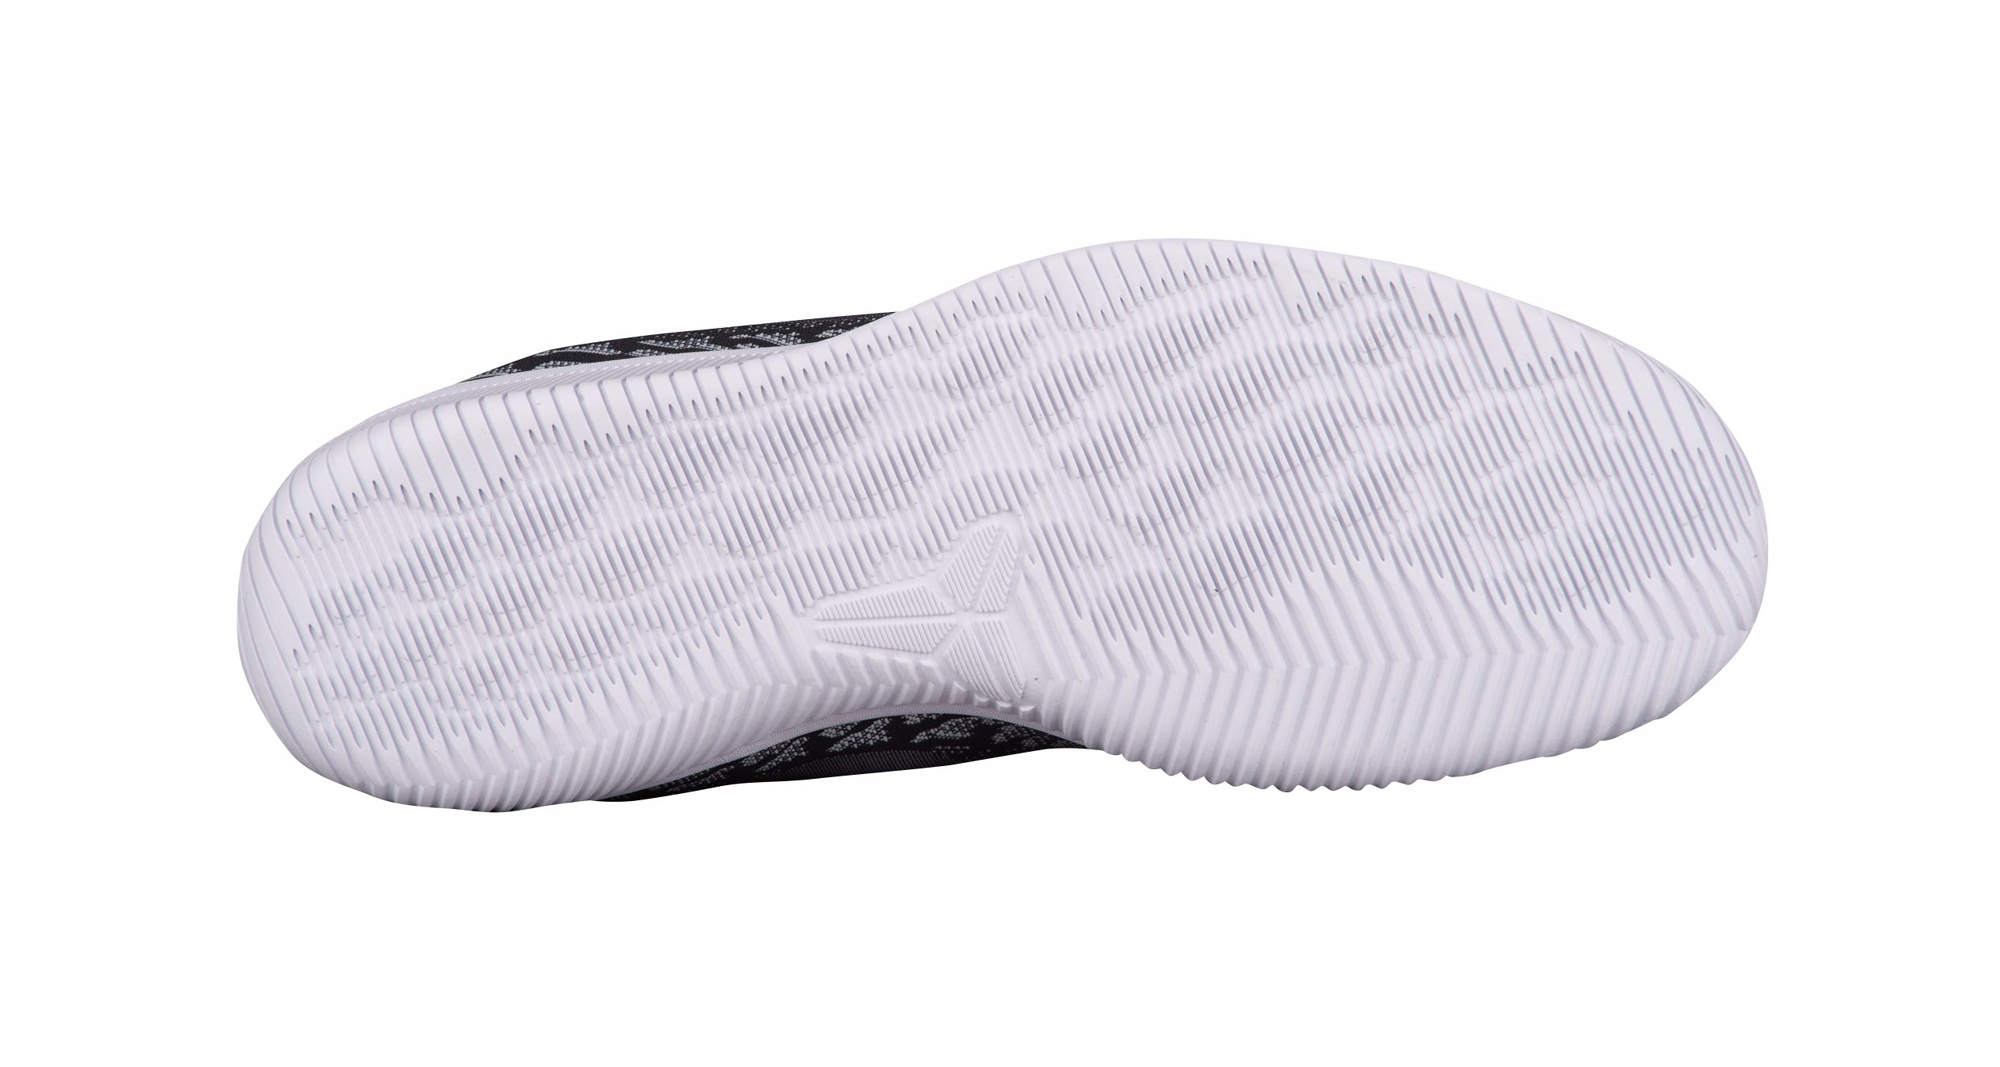 Kobe Bryant's Nike Mamba Focus is Available Now - WearTesters